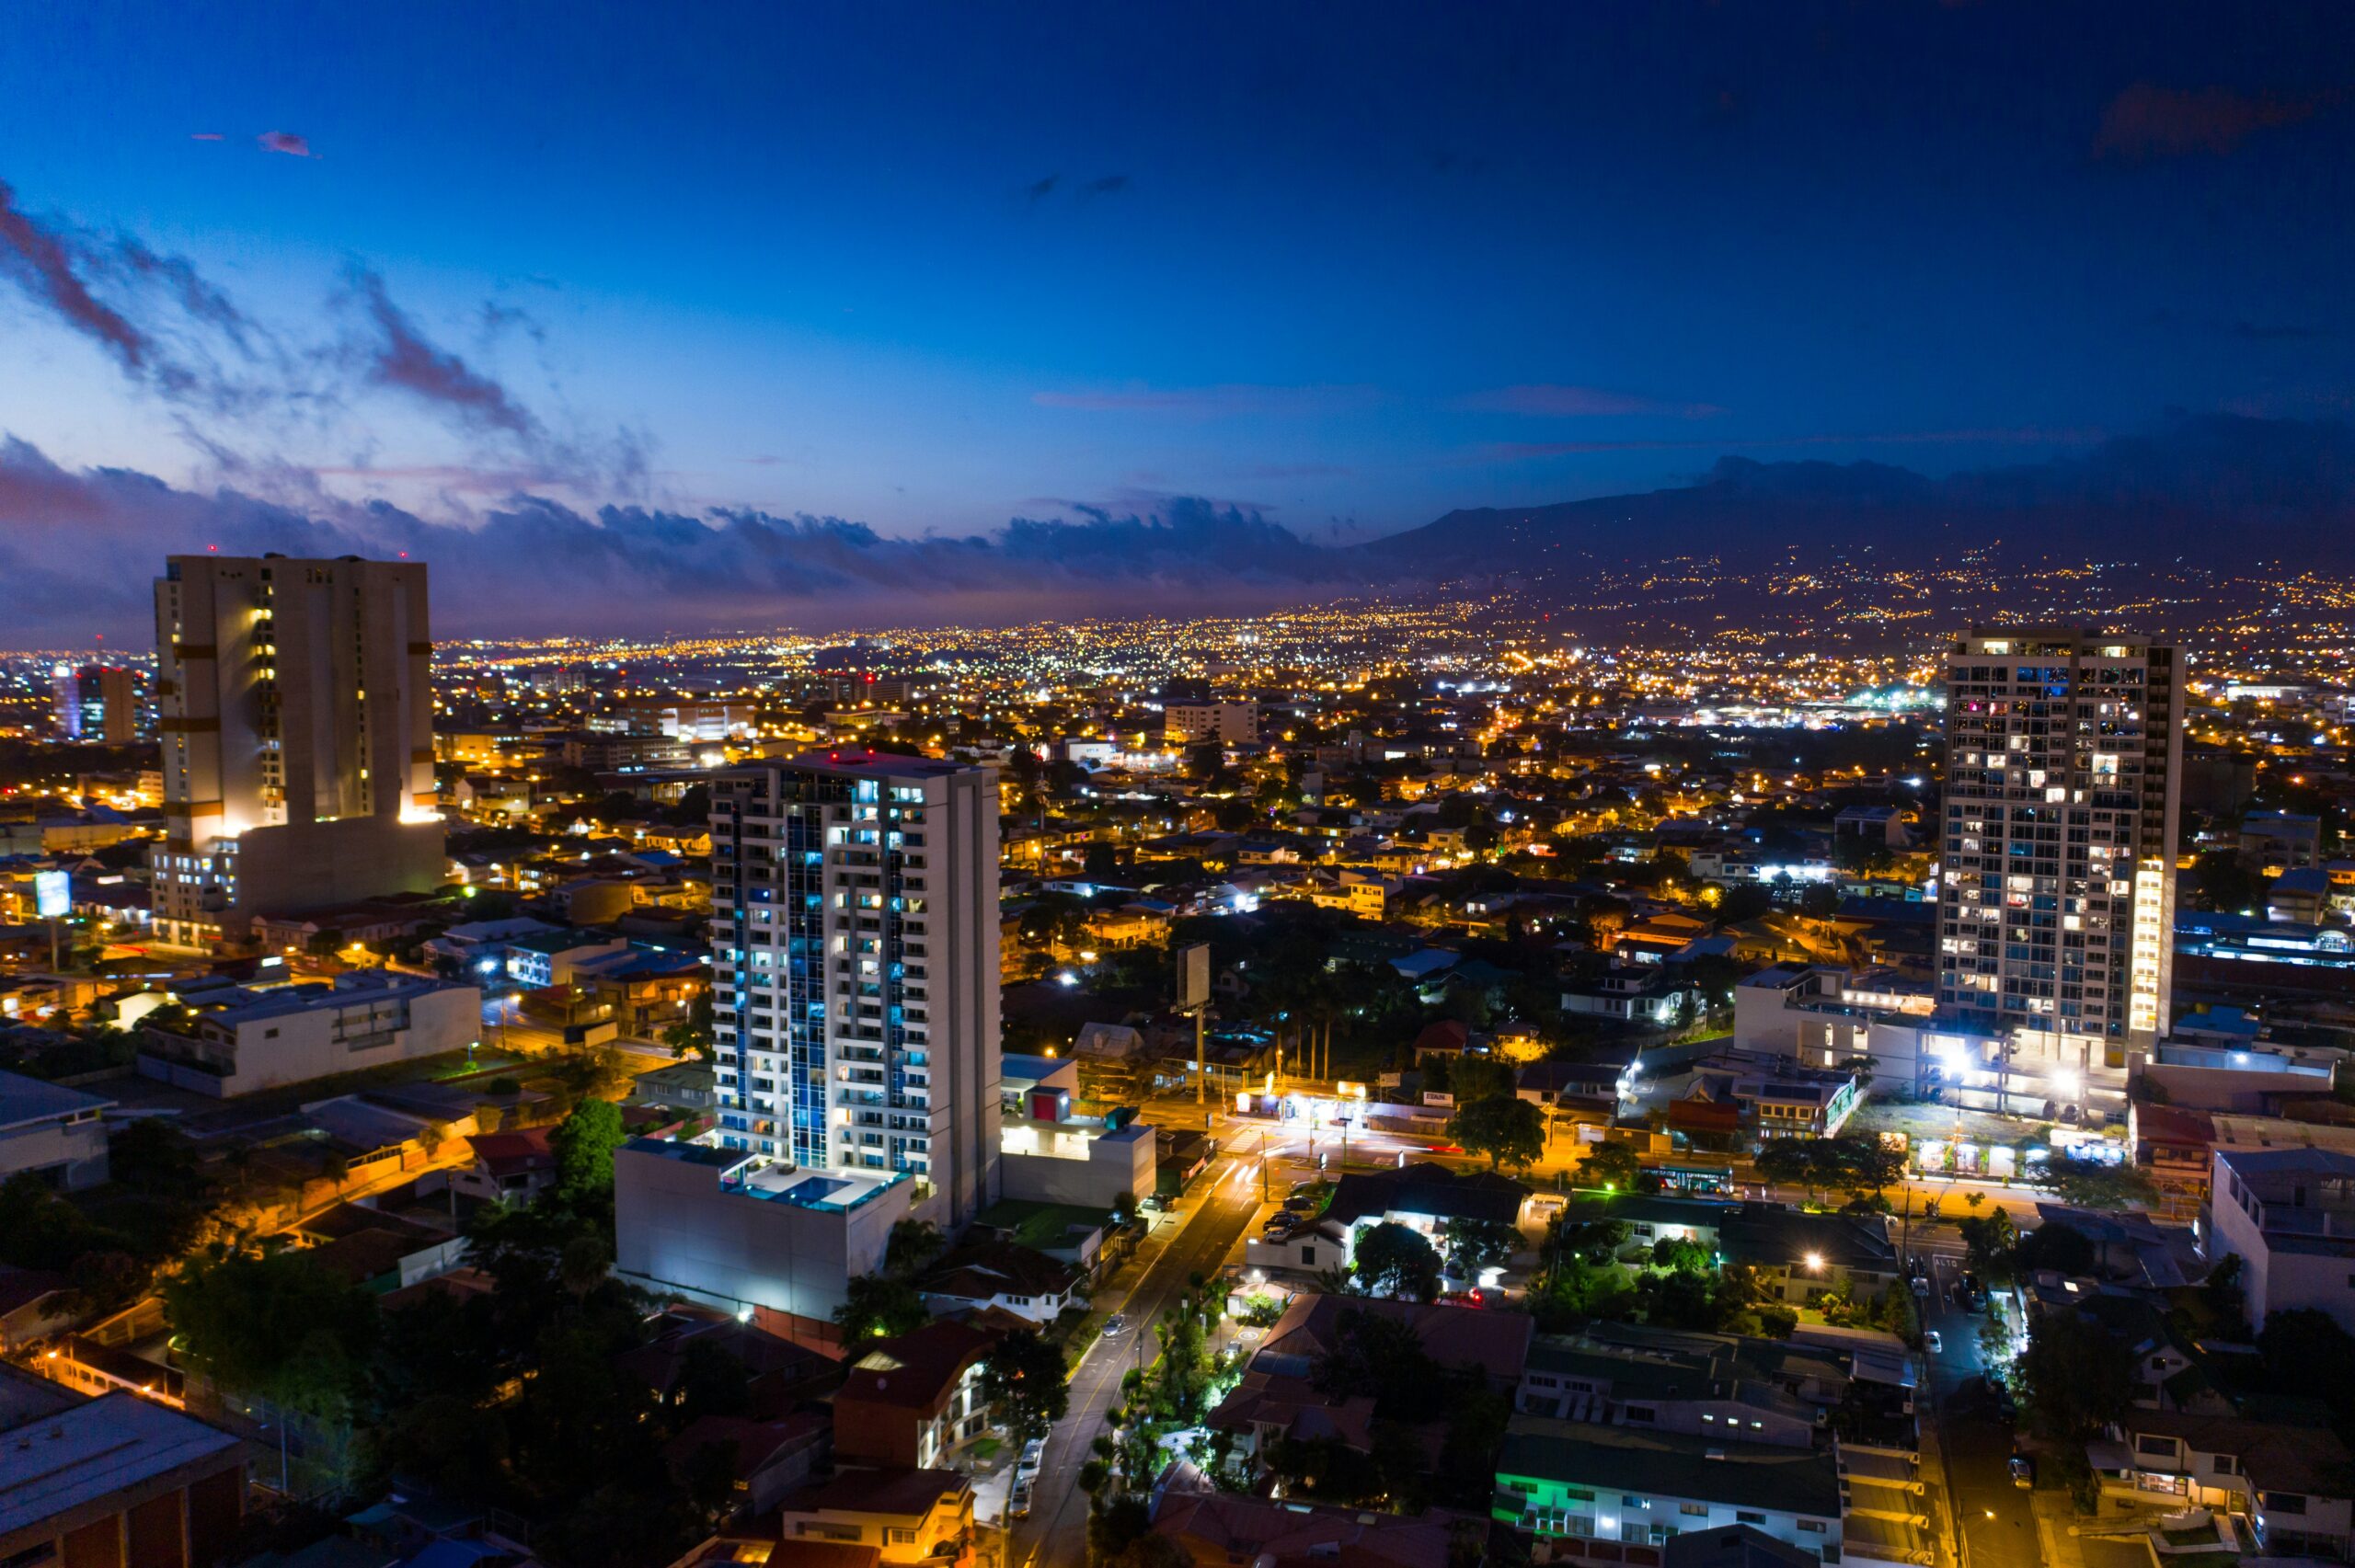 These are the top tips for travelers trying to stay safe in Costa Rica.
pictured: the night cityscape of Costa Rica